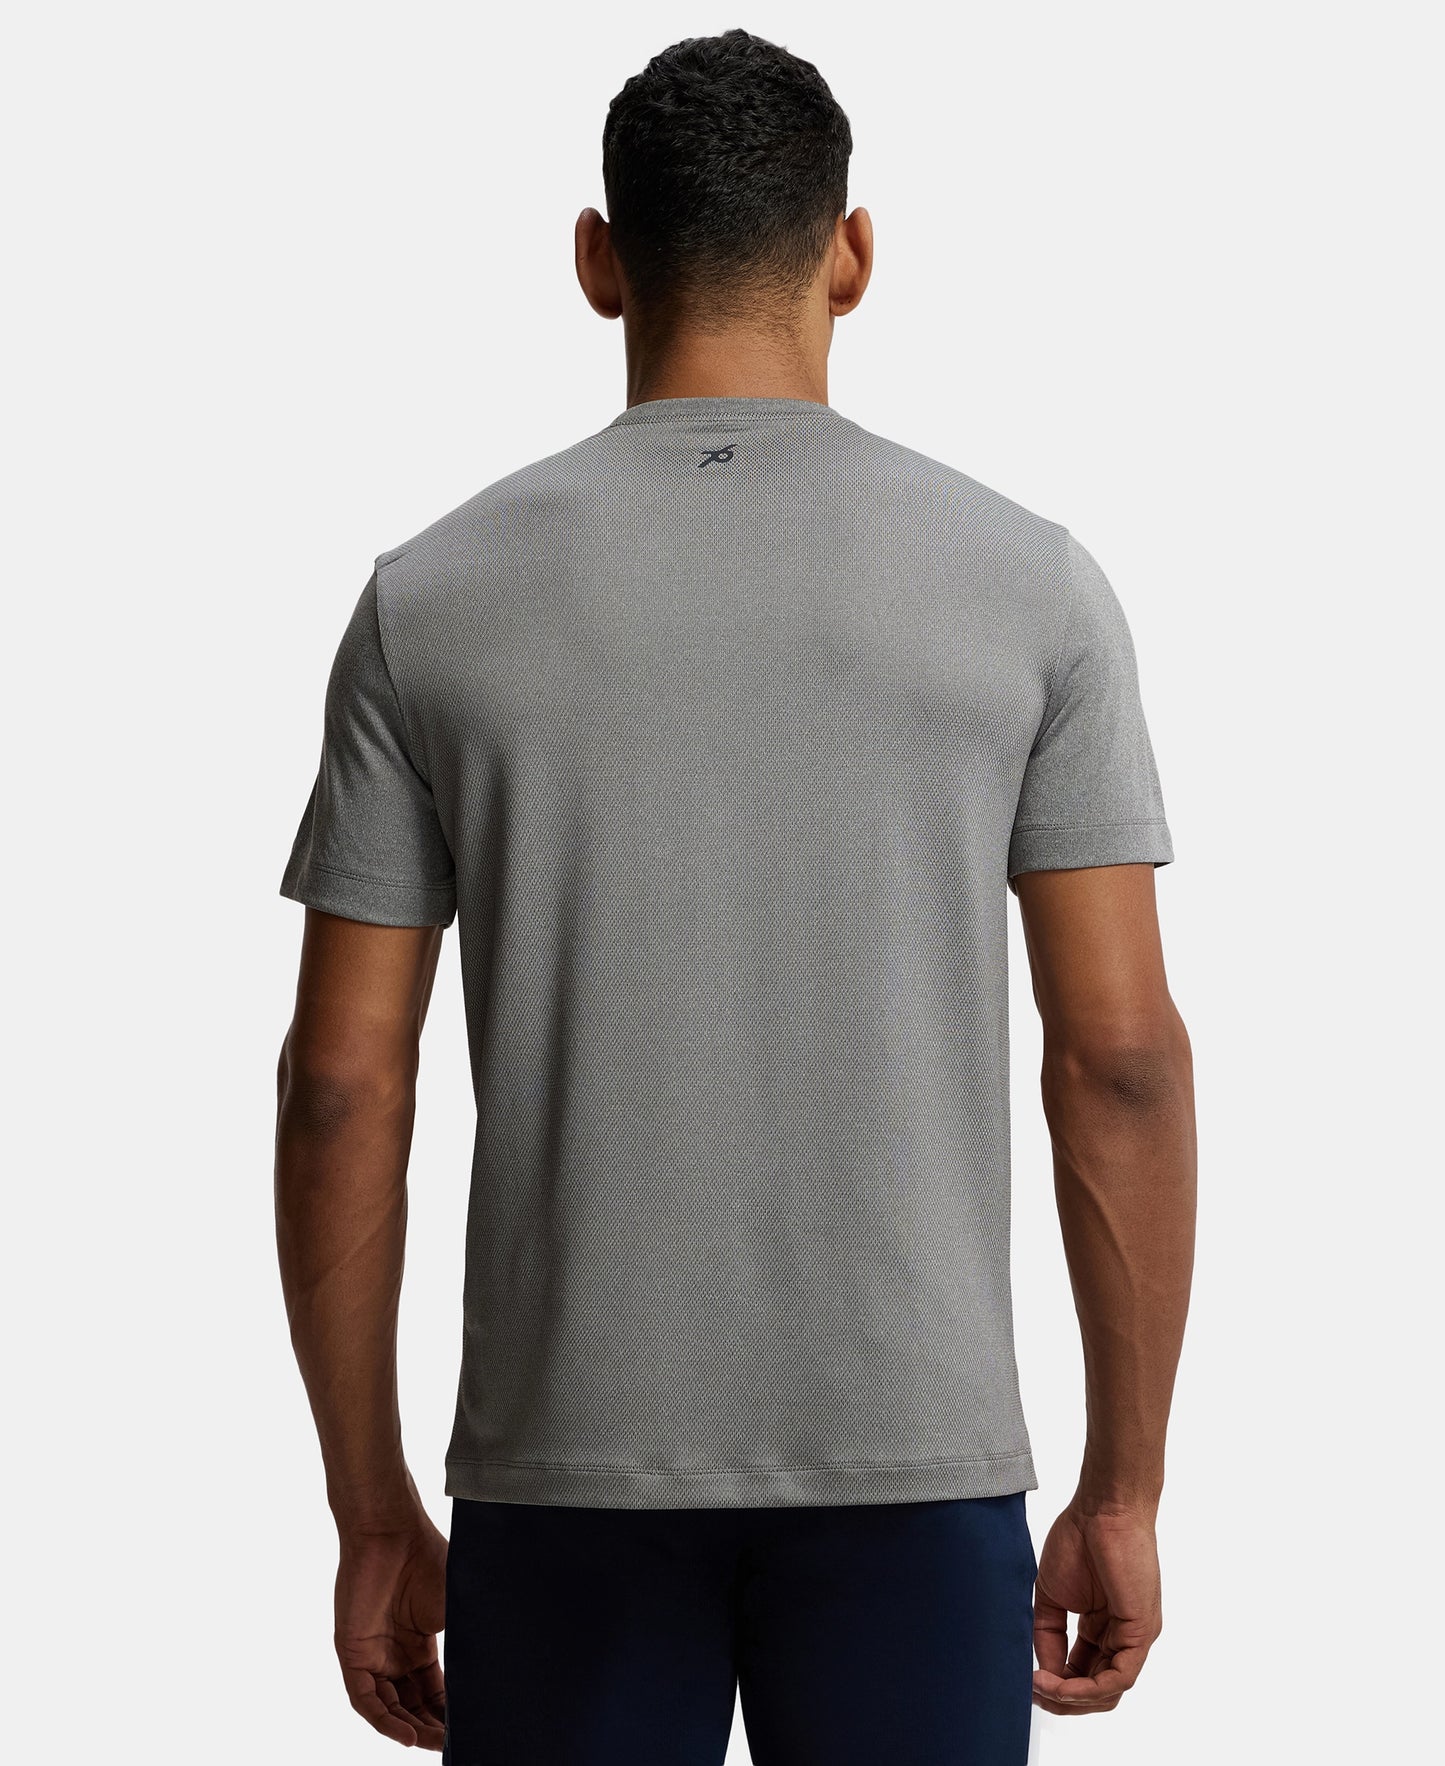 Recycled Microfiber Elastane Stretch Half Sleeve Round Neck T-Shirt with Breathable Mesh - Quiet Shade-3